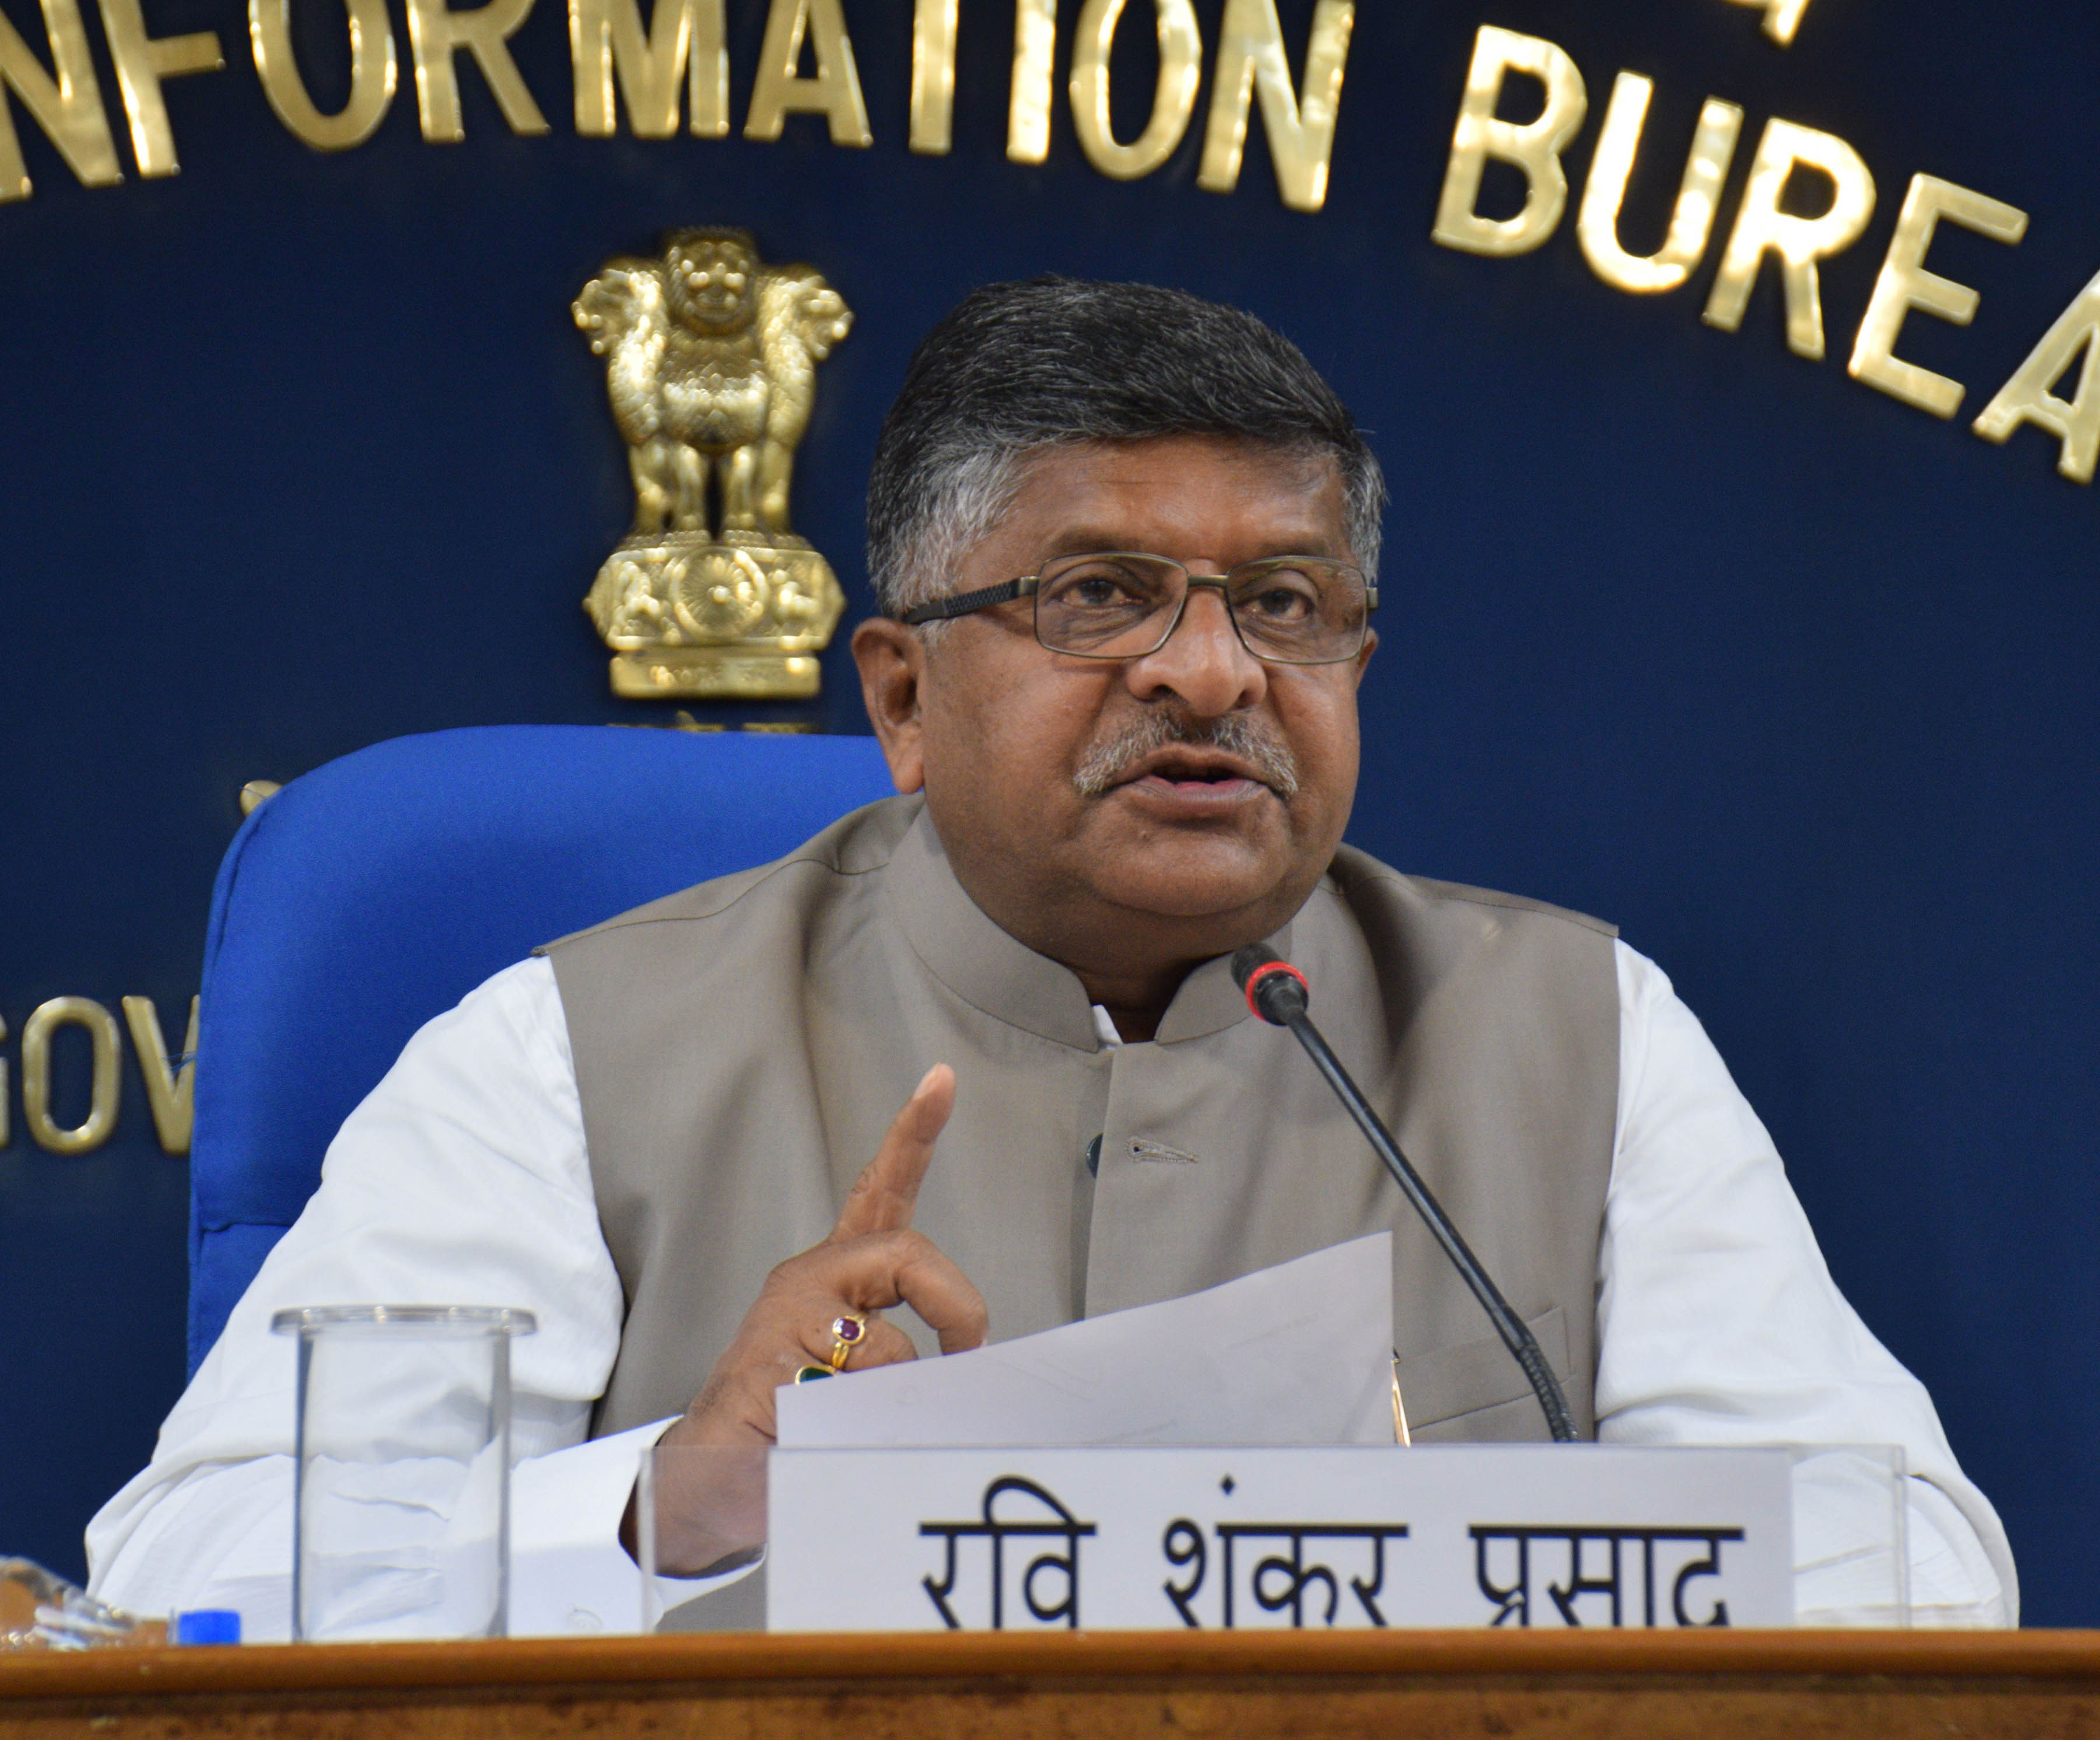 Union Minister for Communications and IT, Ravi Shankar Prasad briefing newsmen after a Cabinet meeting in New Delhi on Wednesday. (UNI )